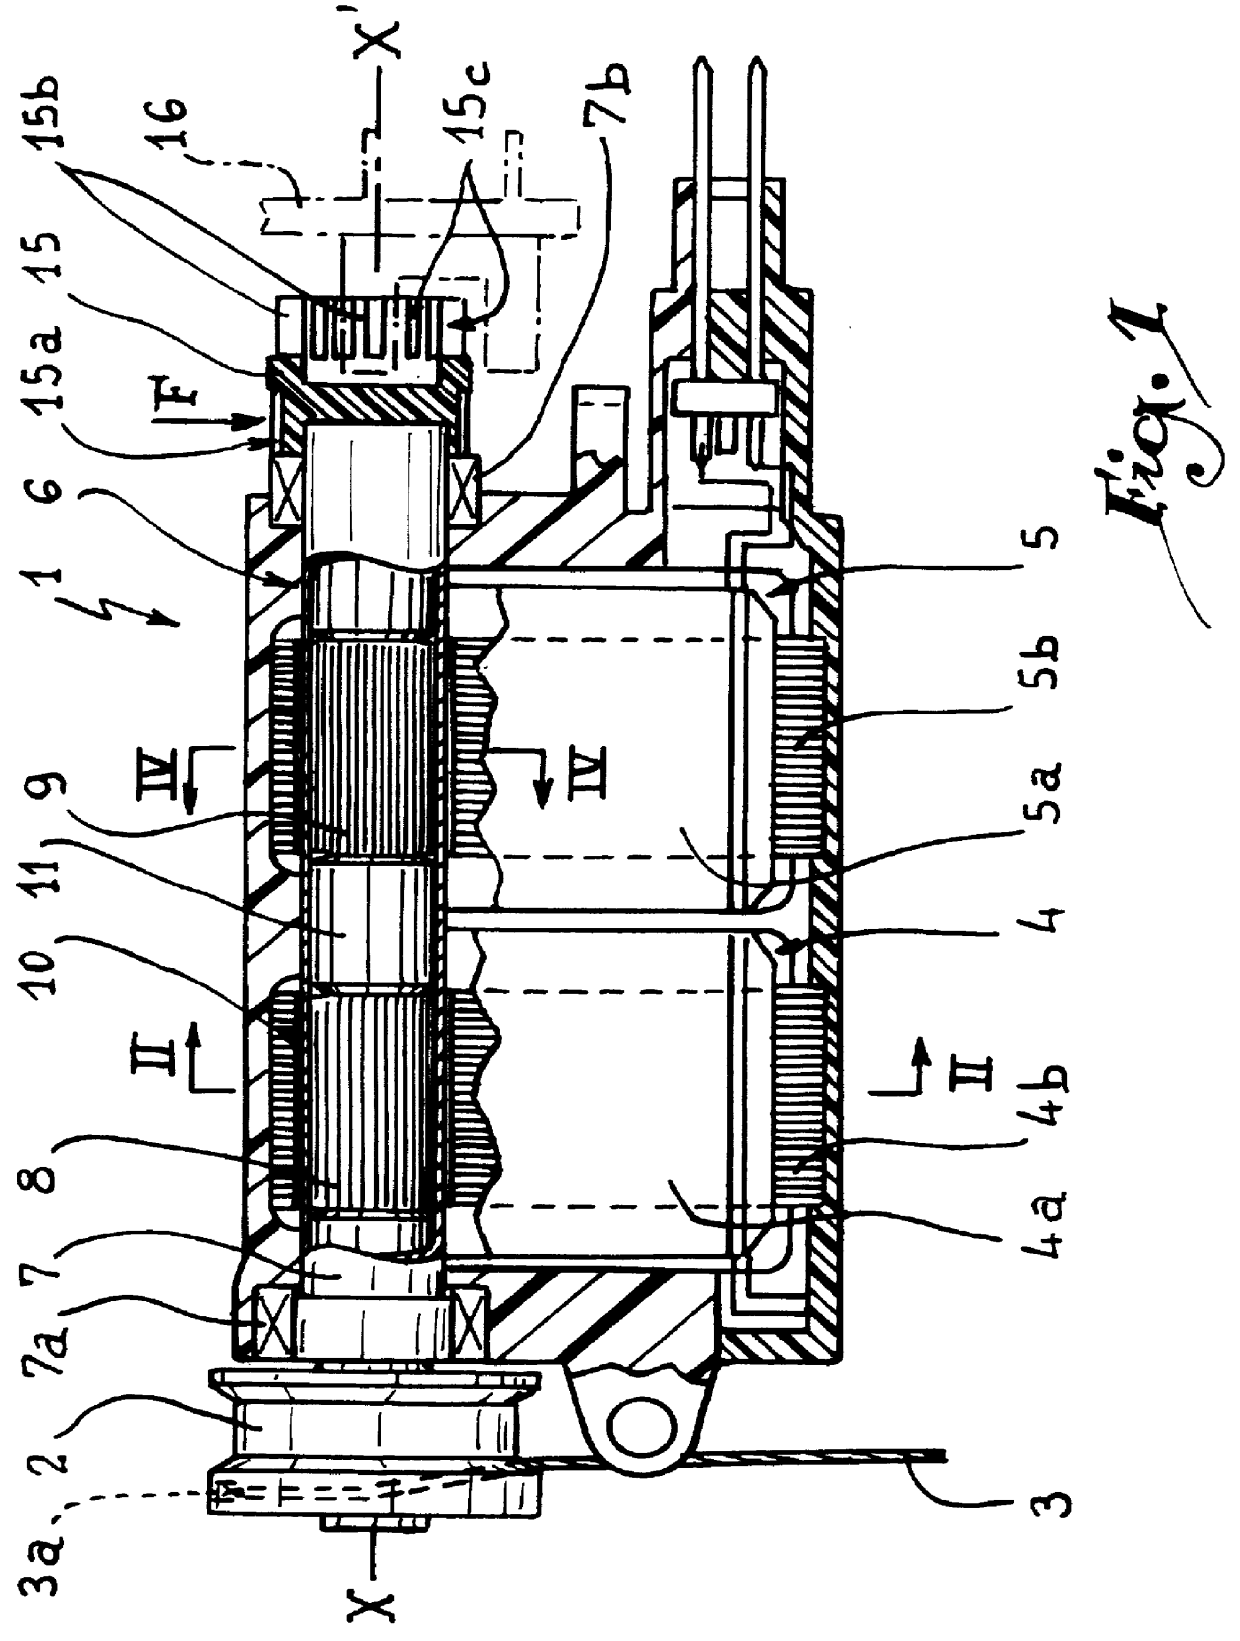 Electrical rotating actuator for forming a weaving loom shed